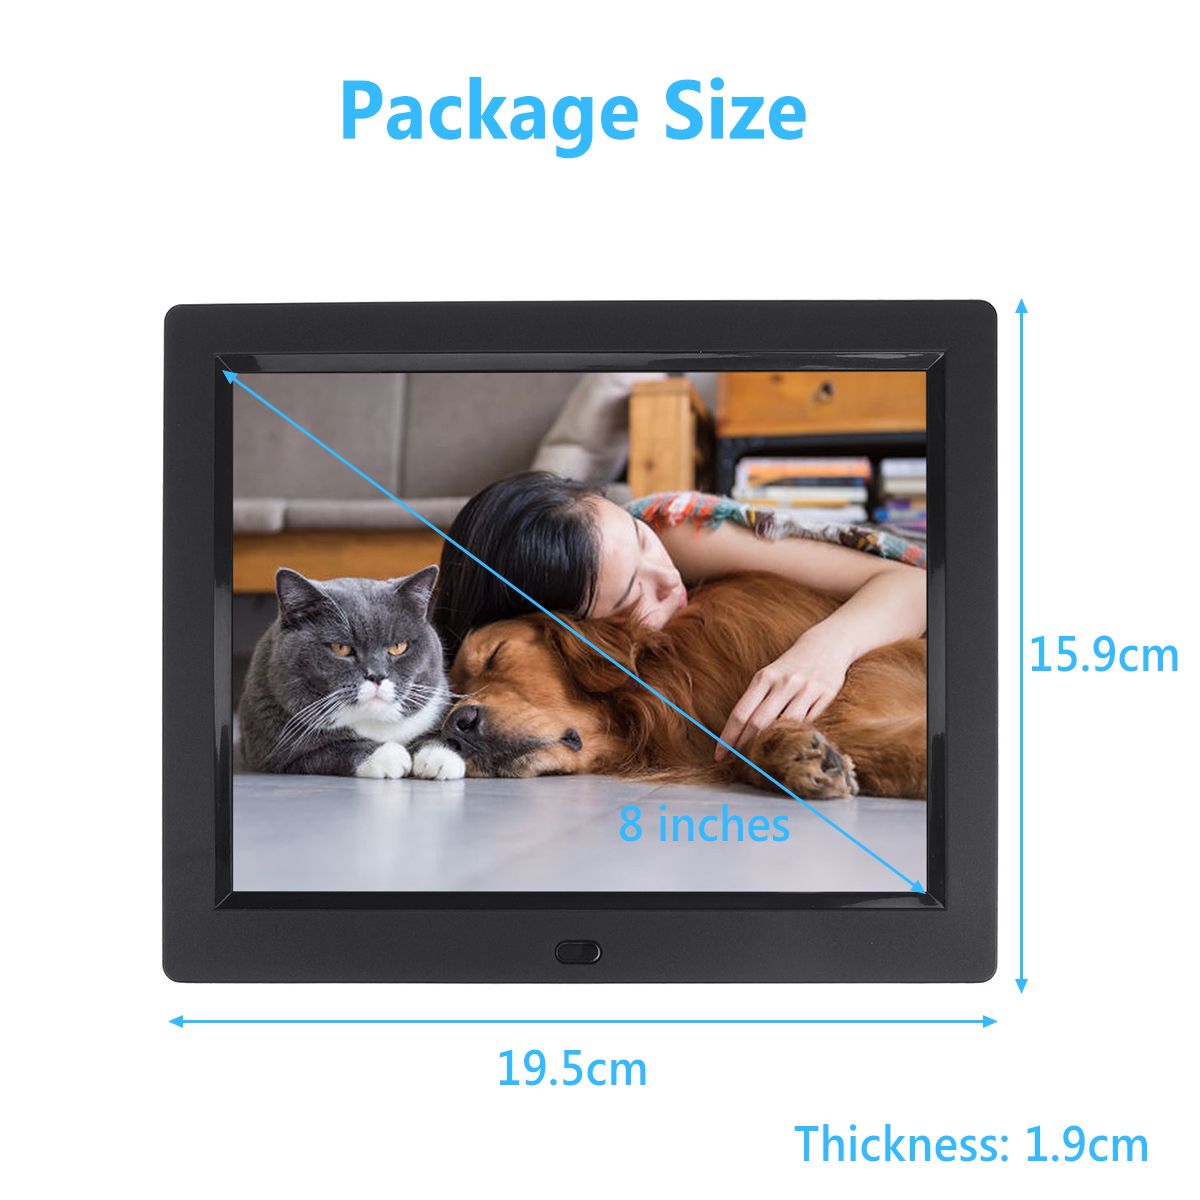 8inch-TFT-LCD-Digital-Photo-Frame-Electronic-Picture-Album-MP3-Video-Player-Clock-1625194